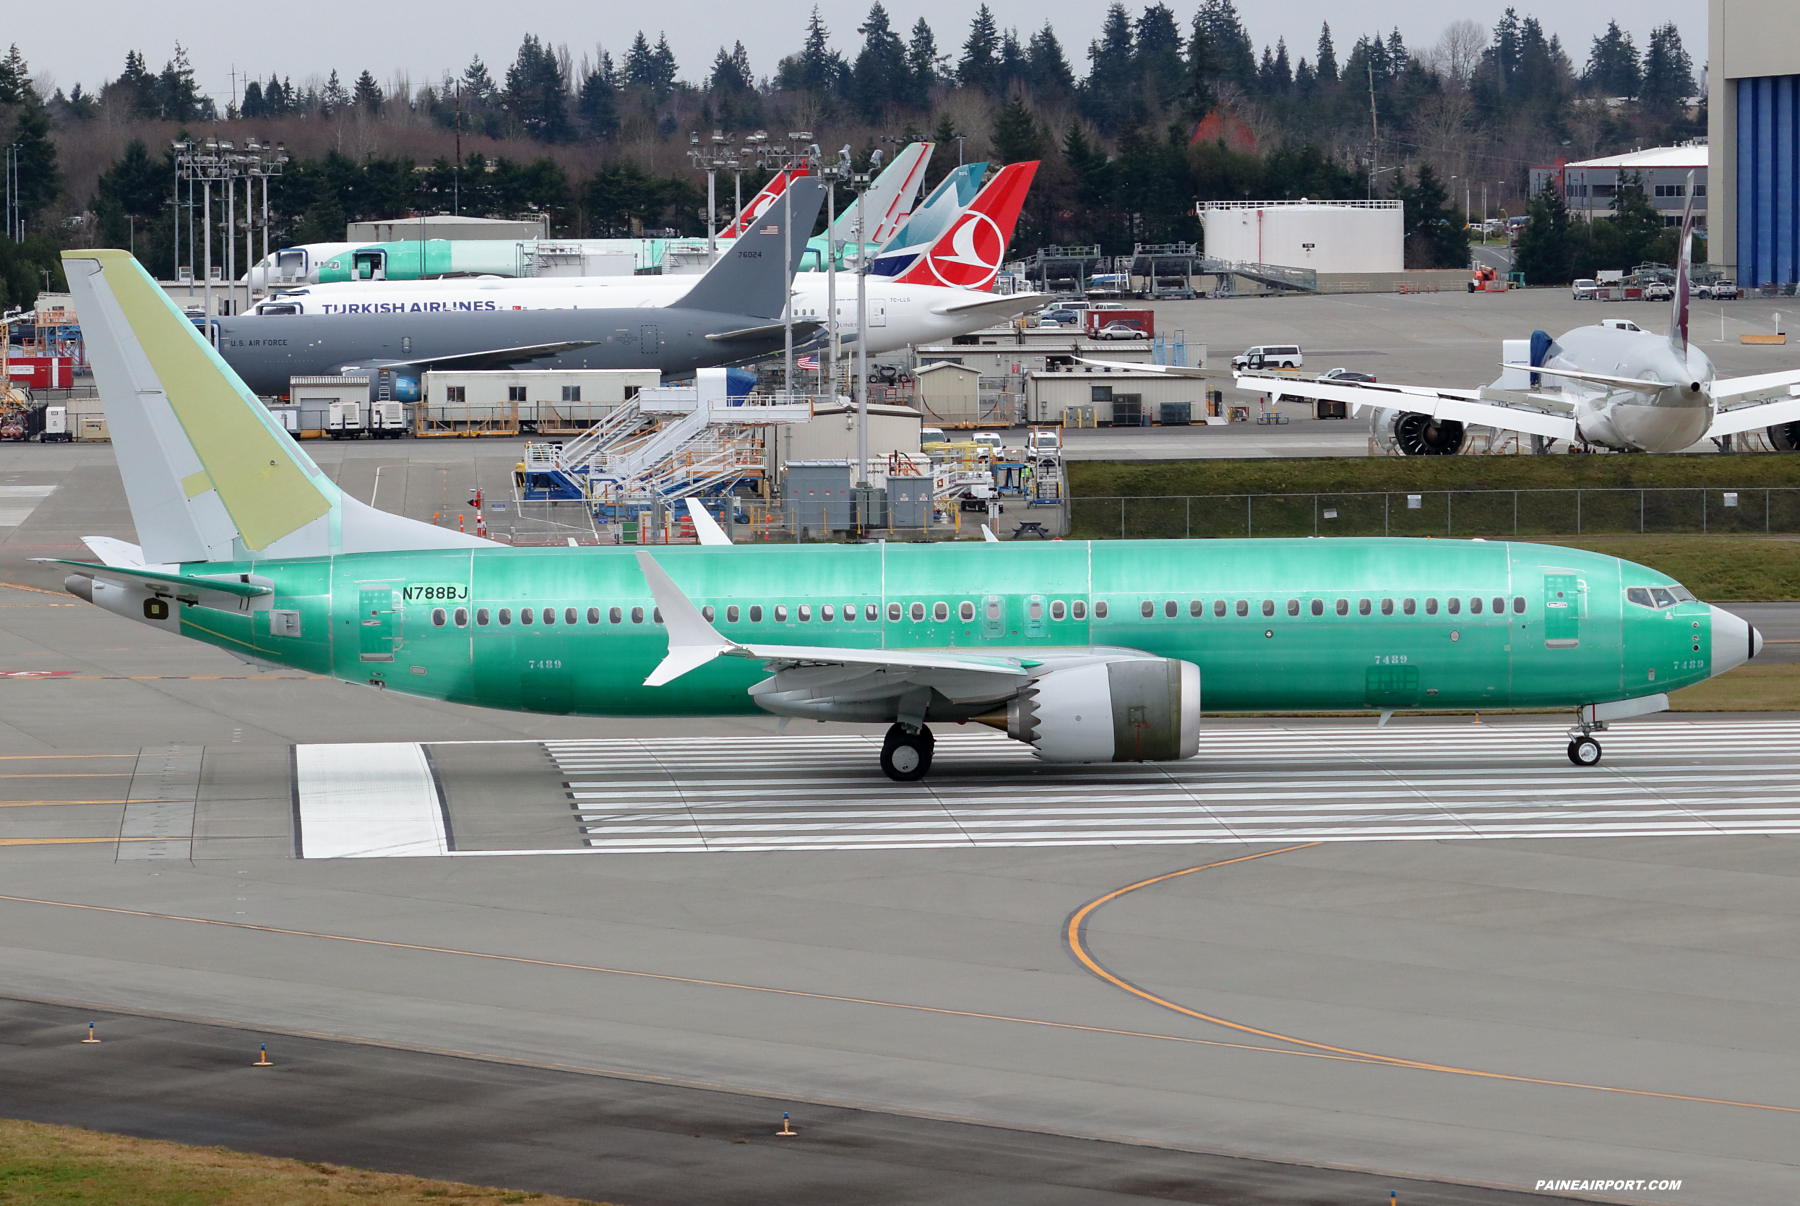 737 N788BJ at Paine Field